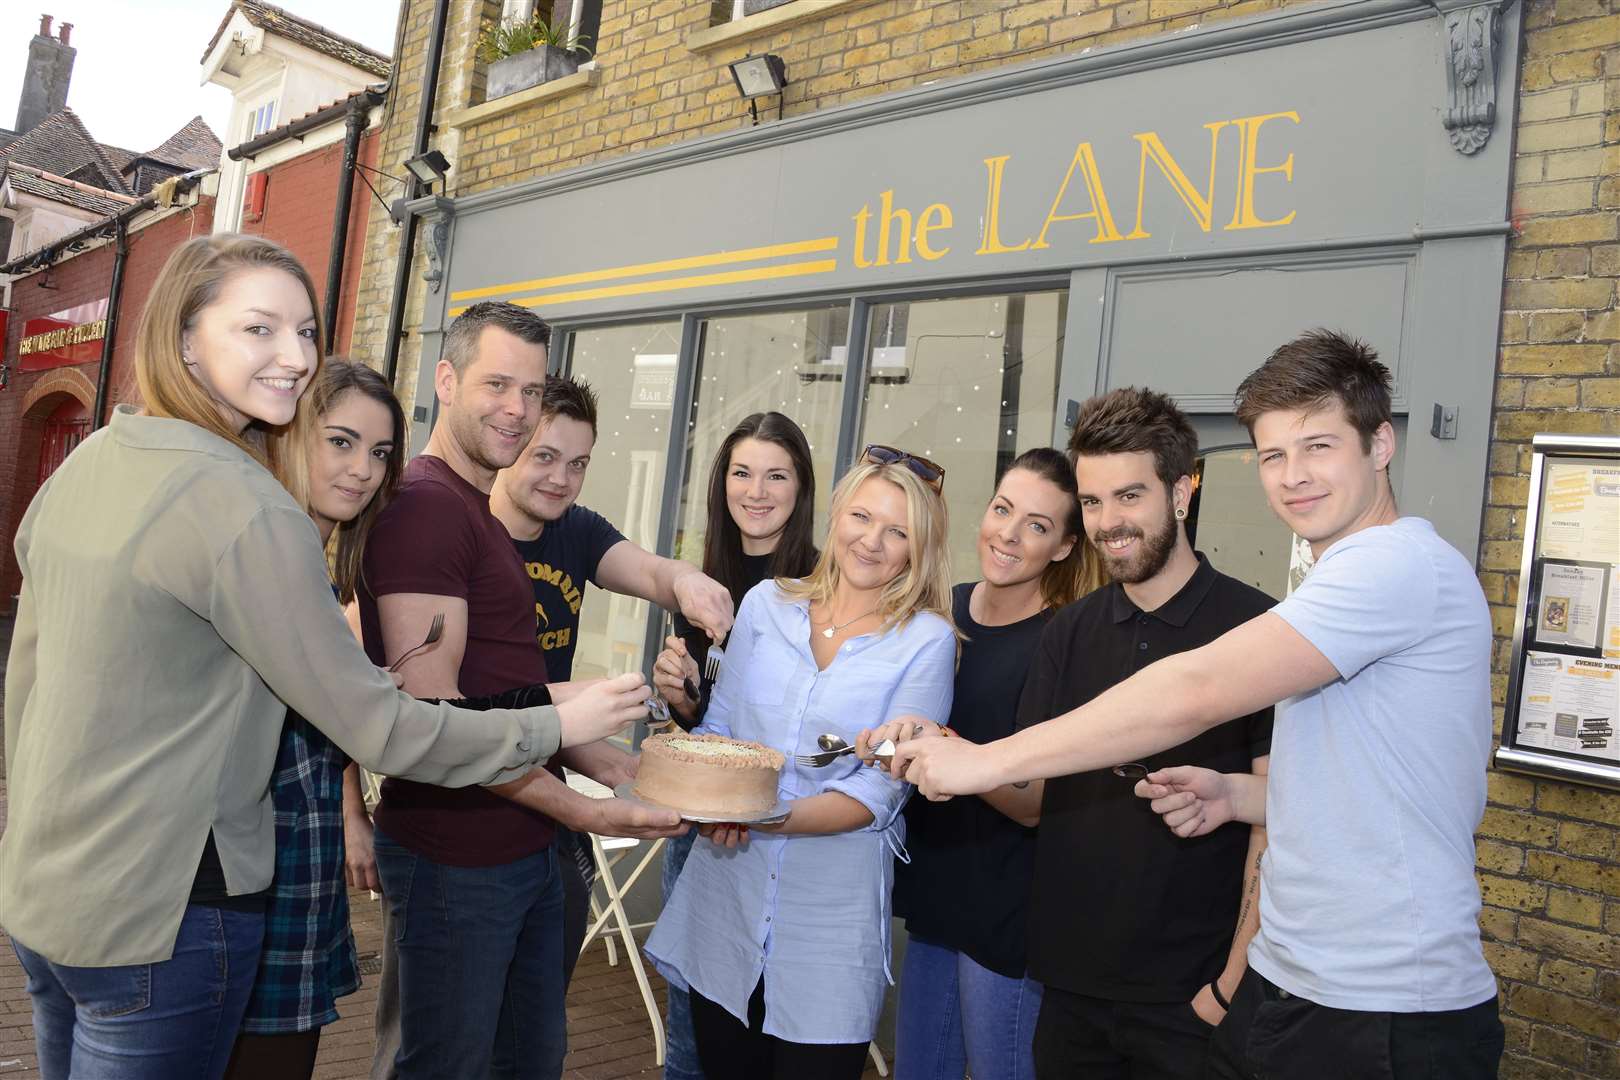 The Lane celebrating their first year in business in 2015. Picture: Paul Amos